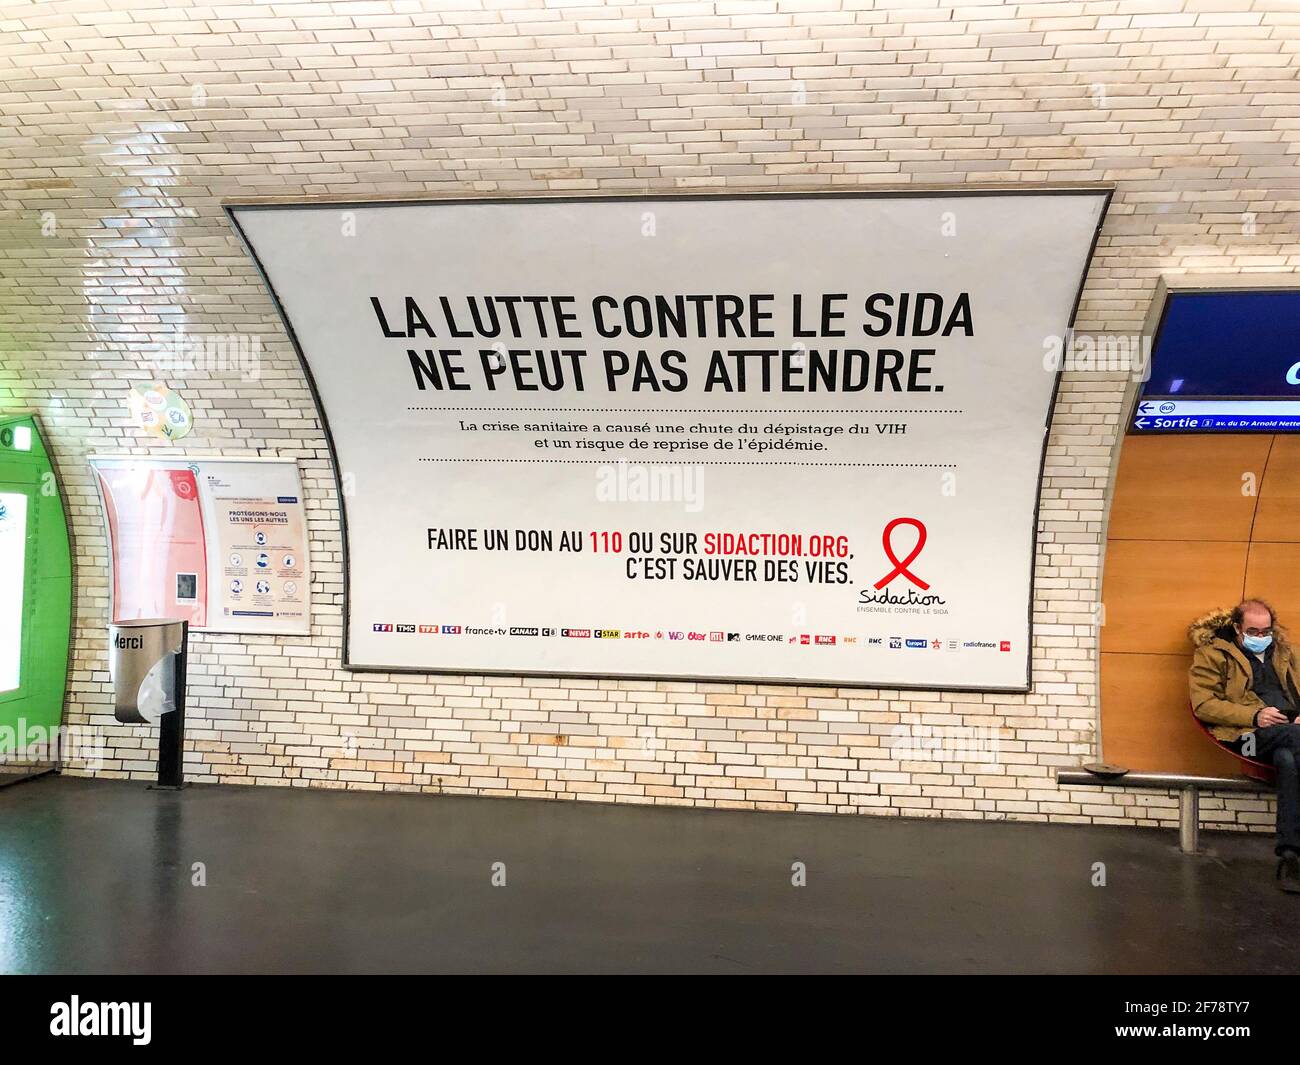 Paris, France, Paris Metro, French Advertising campaign, AIDS NGO,  Sidaction poster inside the subway station wall, Paris billboard, poster  advertising underground tube Stock Photo - Alamy